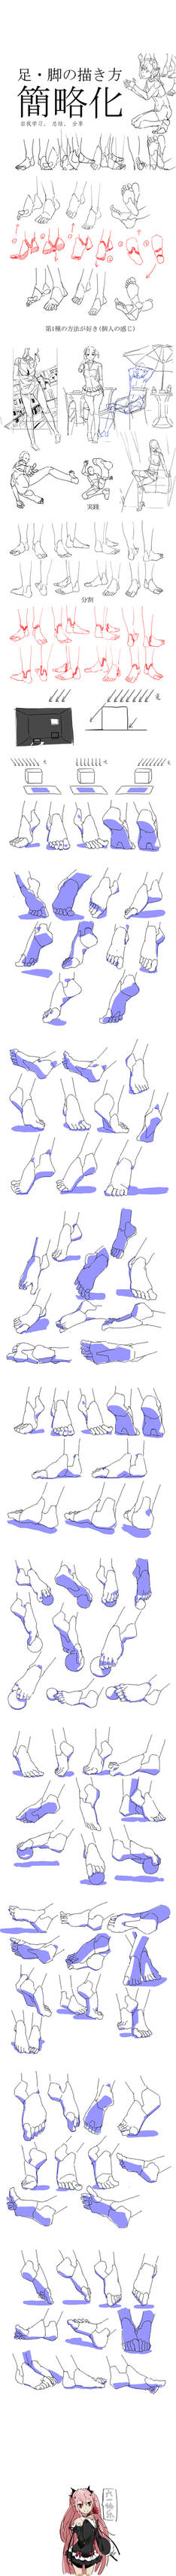 Foot exercise